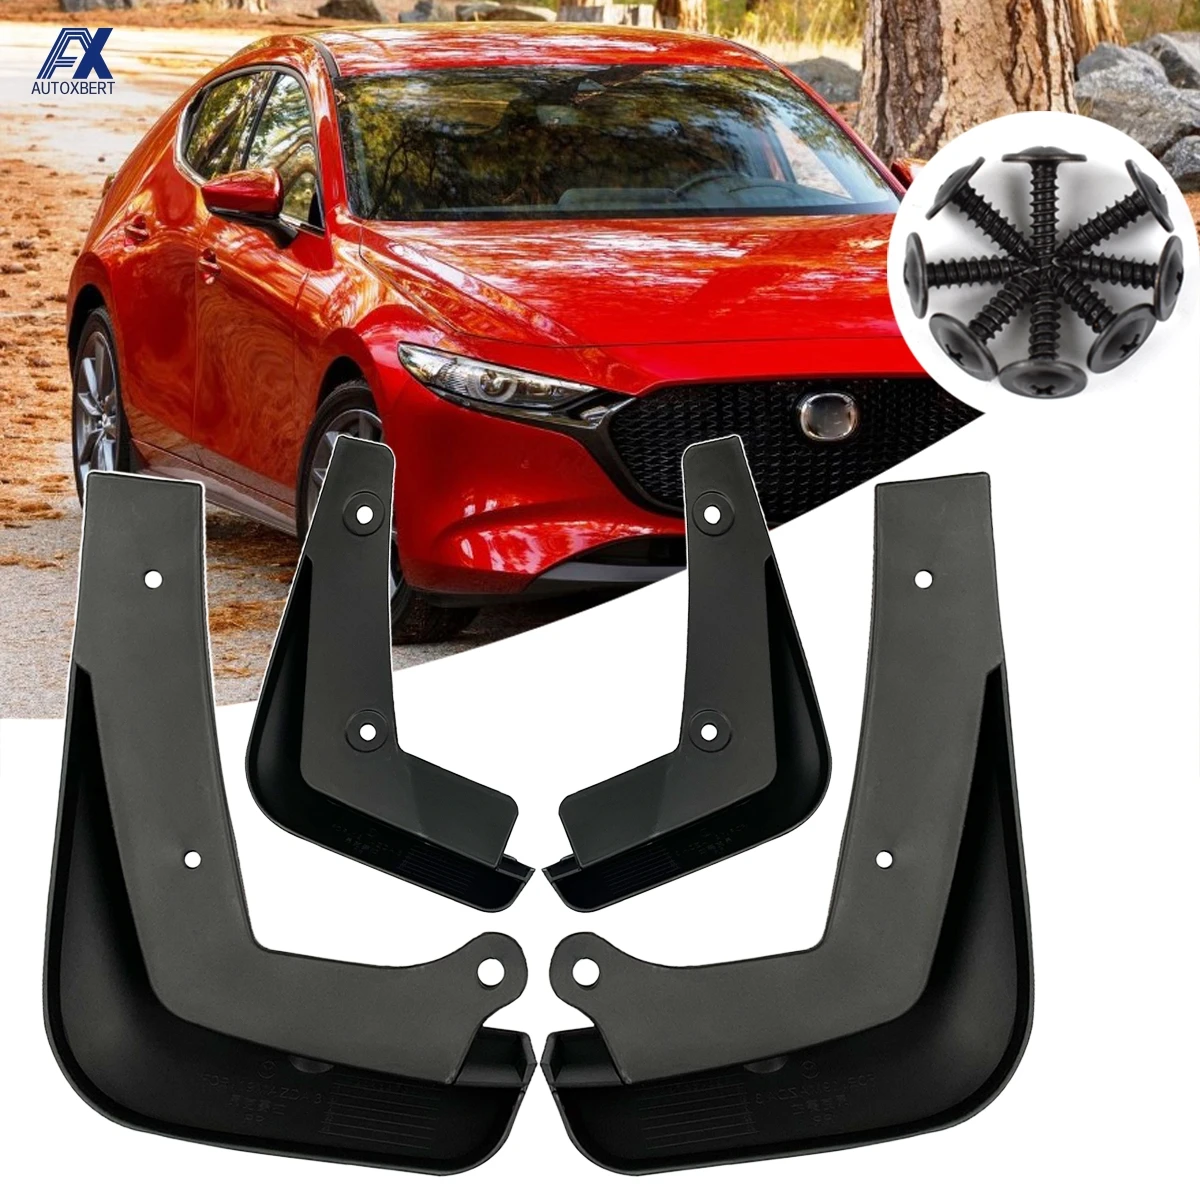 Car Mud Flaps Splash Guards Replacement for Mazda 3 Sedan 4dr 2019 2020 2021 Custom Front Rear Mudguard Kit Molded Fender Mudflaps Full Protection Auto Accessories,4-pc Set 